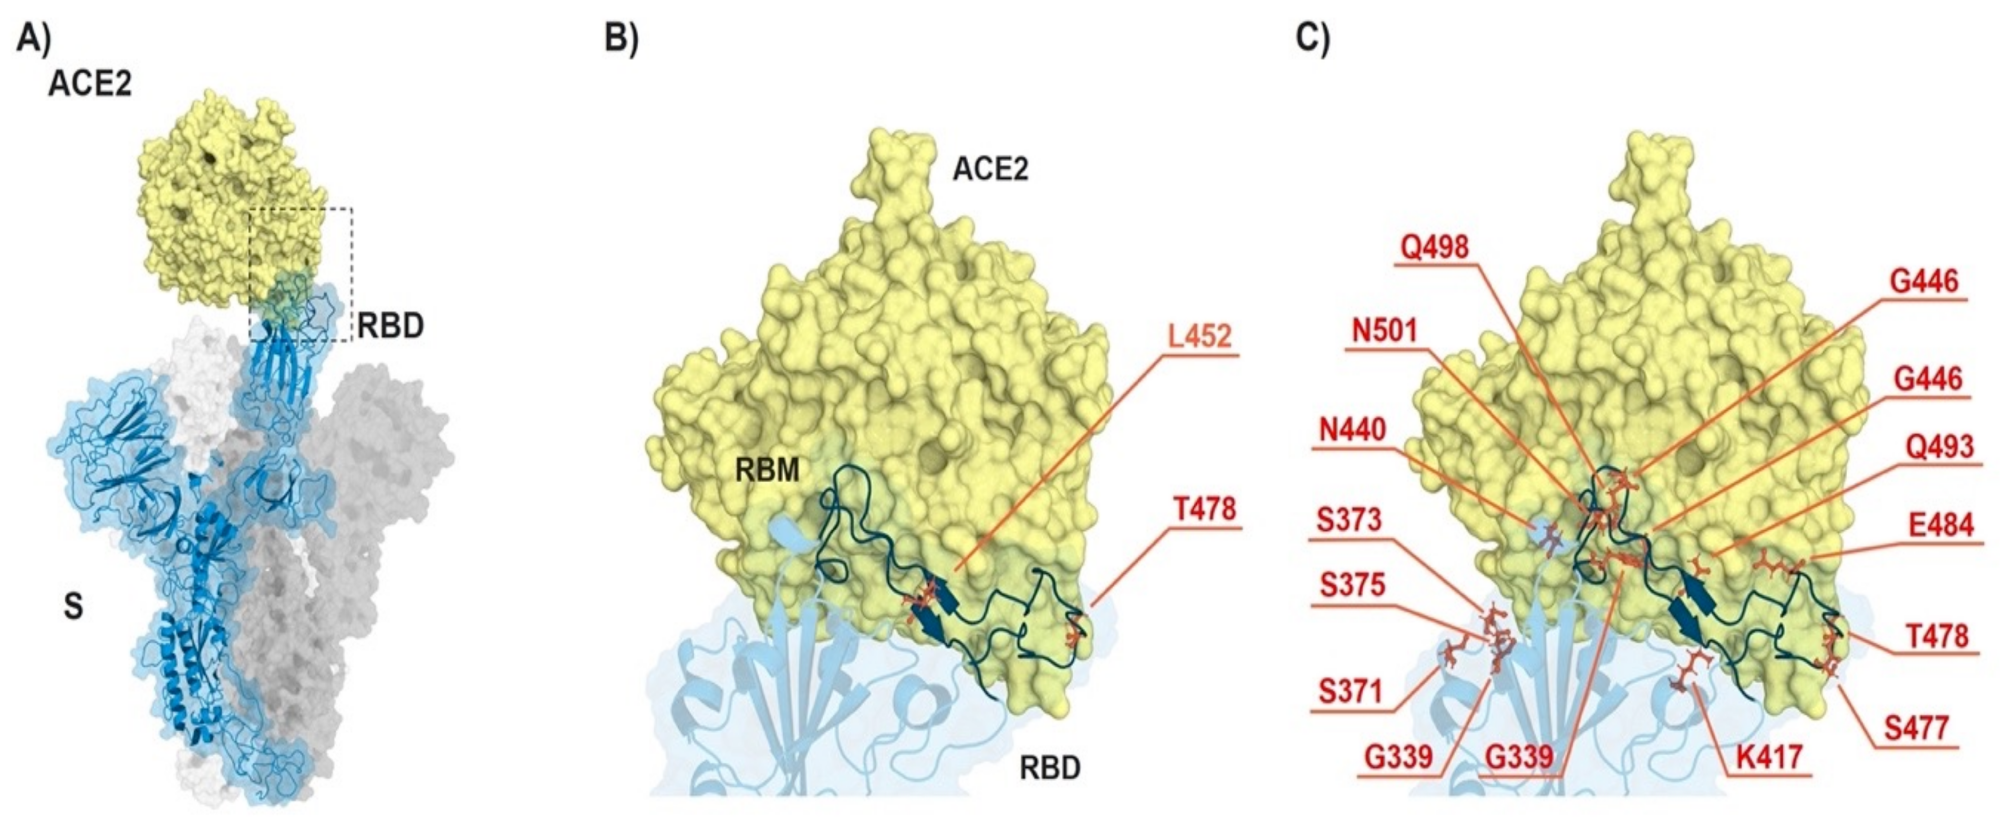 ​​​​​​​ACE2-spike interaction and mutations found in RBD of B.1.617.2 (Delta) and B.1.1.529 (Omicron). (A) S monomer (blue ribbon and surface) bound to ACE2 ectodomain (yellow surface). (B) Detail of (A), highlighting the mutated residues (orange sticks) in Delta. (C) Same as in (B) but highlighting the mutated residues in Omicron. From PDB files 6ACG and 2AJF.